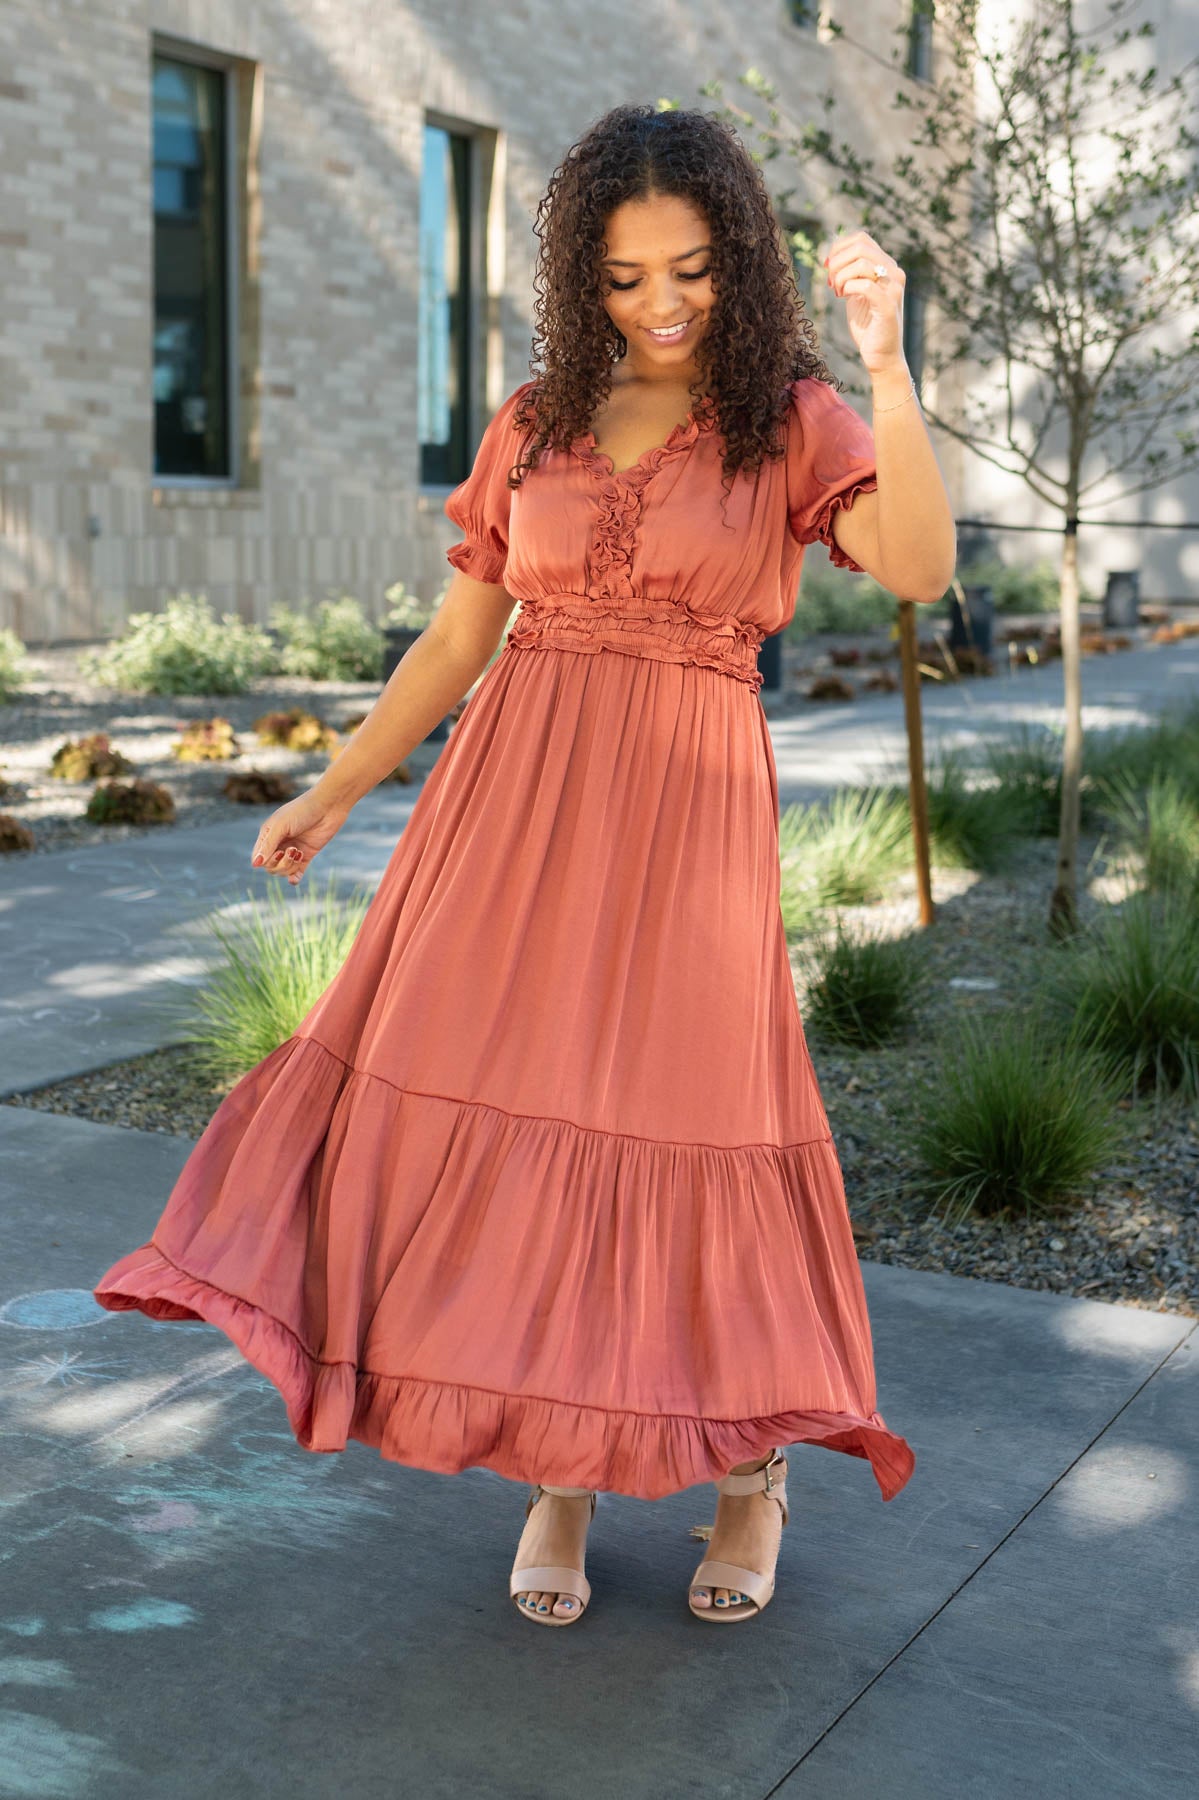 Short sleeve sienna dress with ruffle at the bottom of the skirt